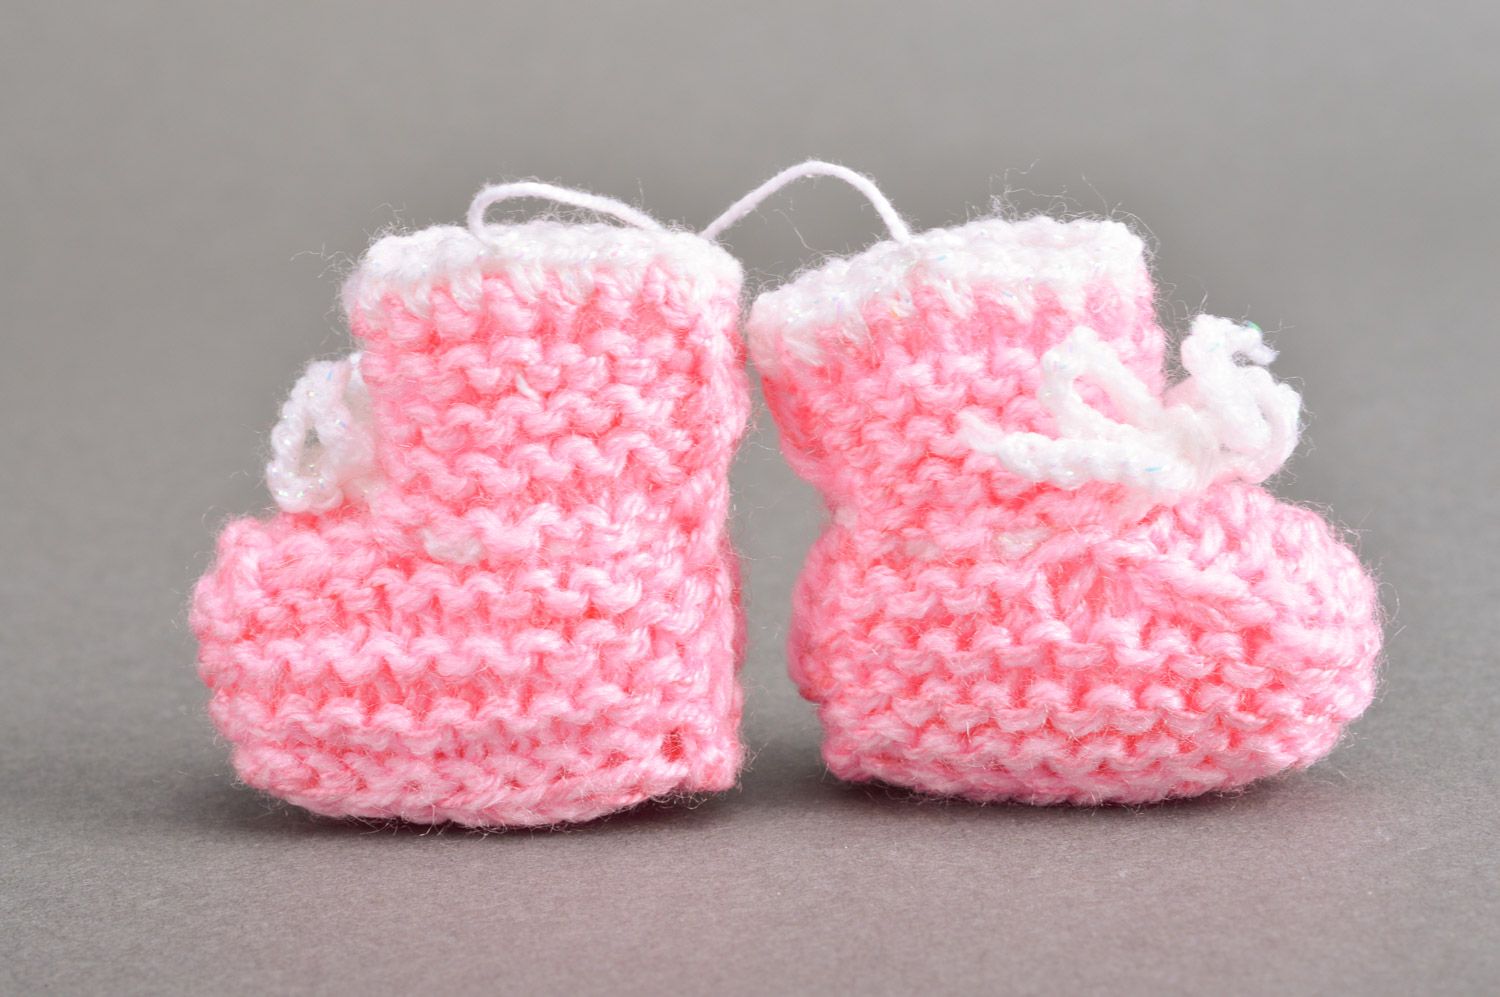 Handmade decorative wall hanging baby shoes knitted of semi-woolen pink threads photo 2